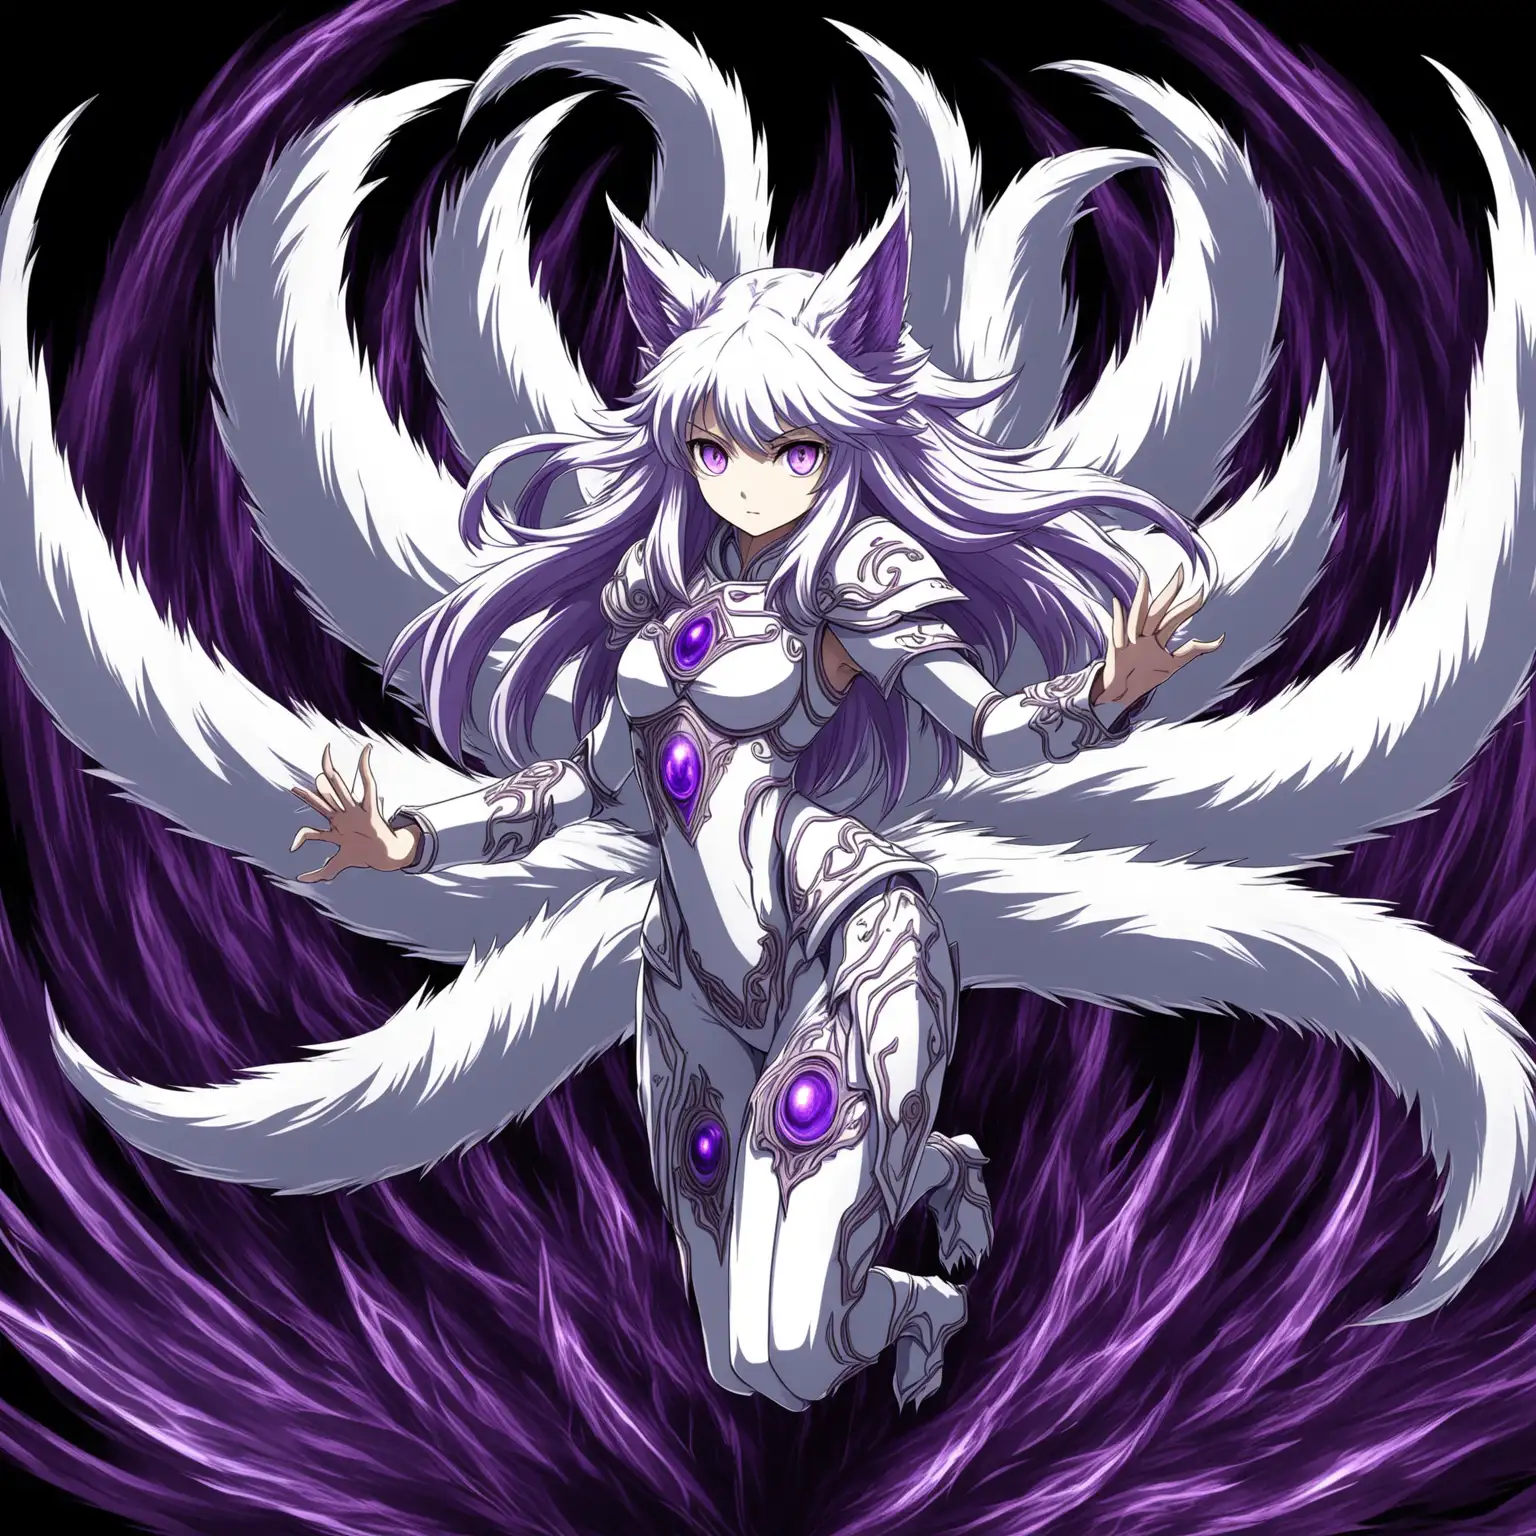 Dynamic Anime Girl with Nine Tails and White Armor in Dark Aura